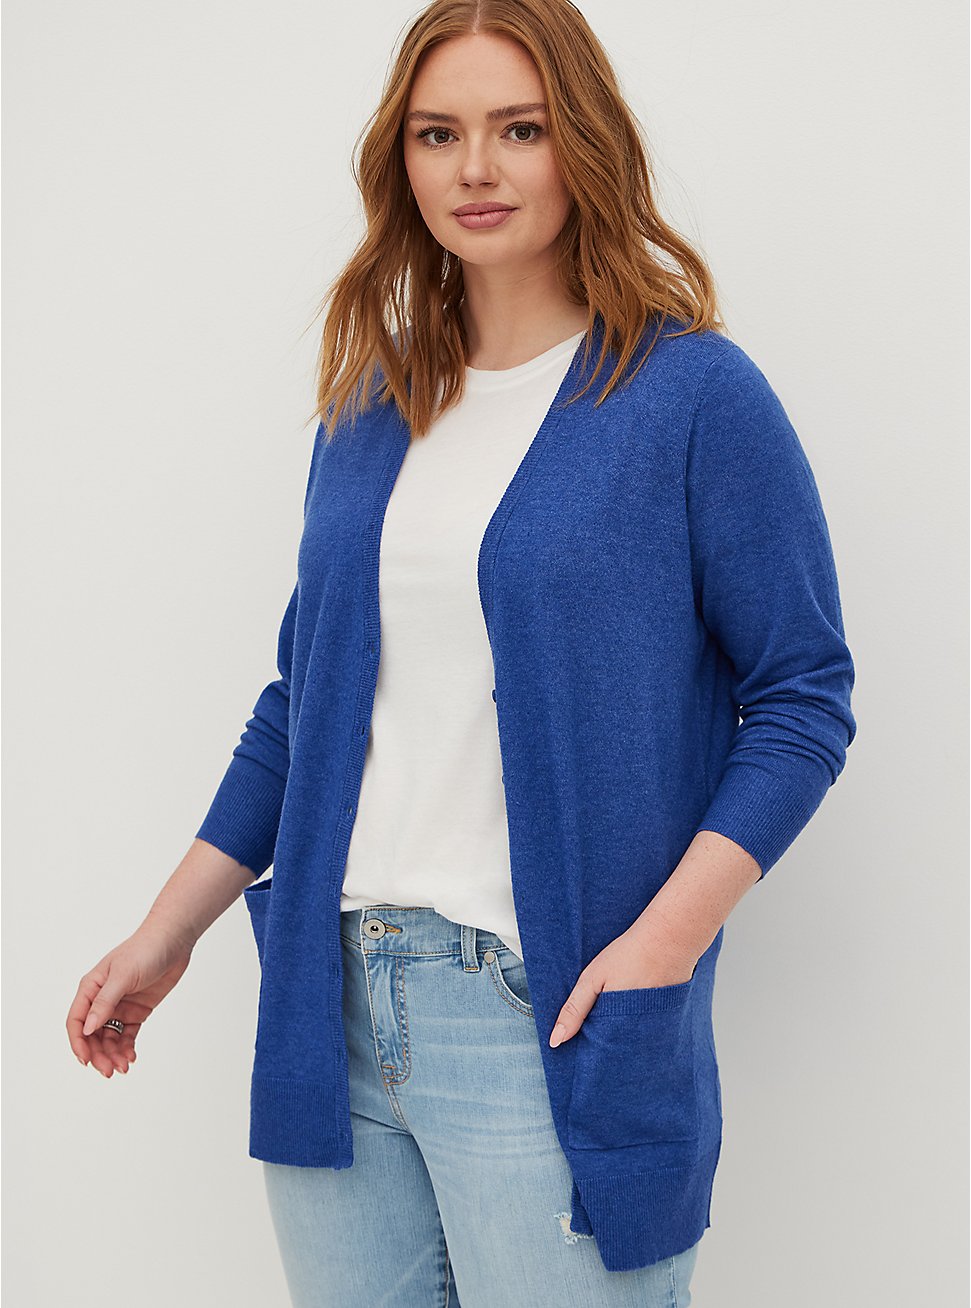 Button Front Cardigan Sweater - Ultra Soft Navy, BLUE, hi-res